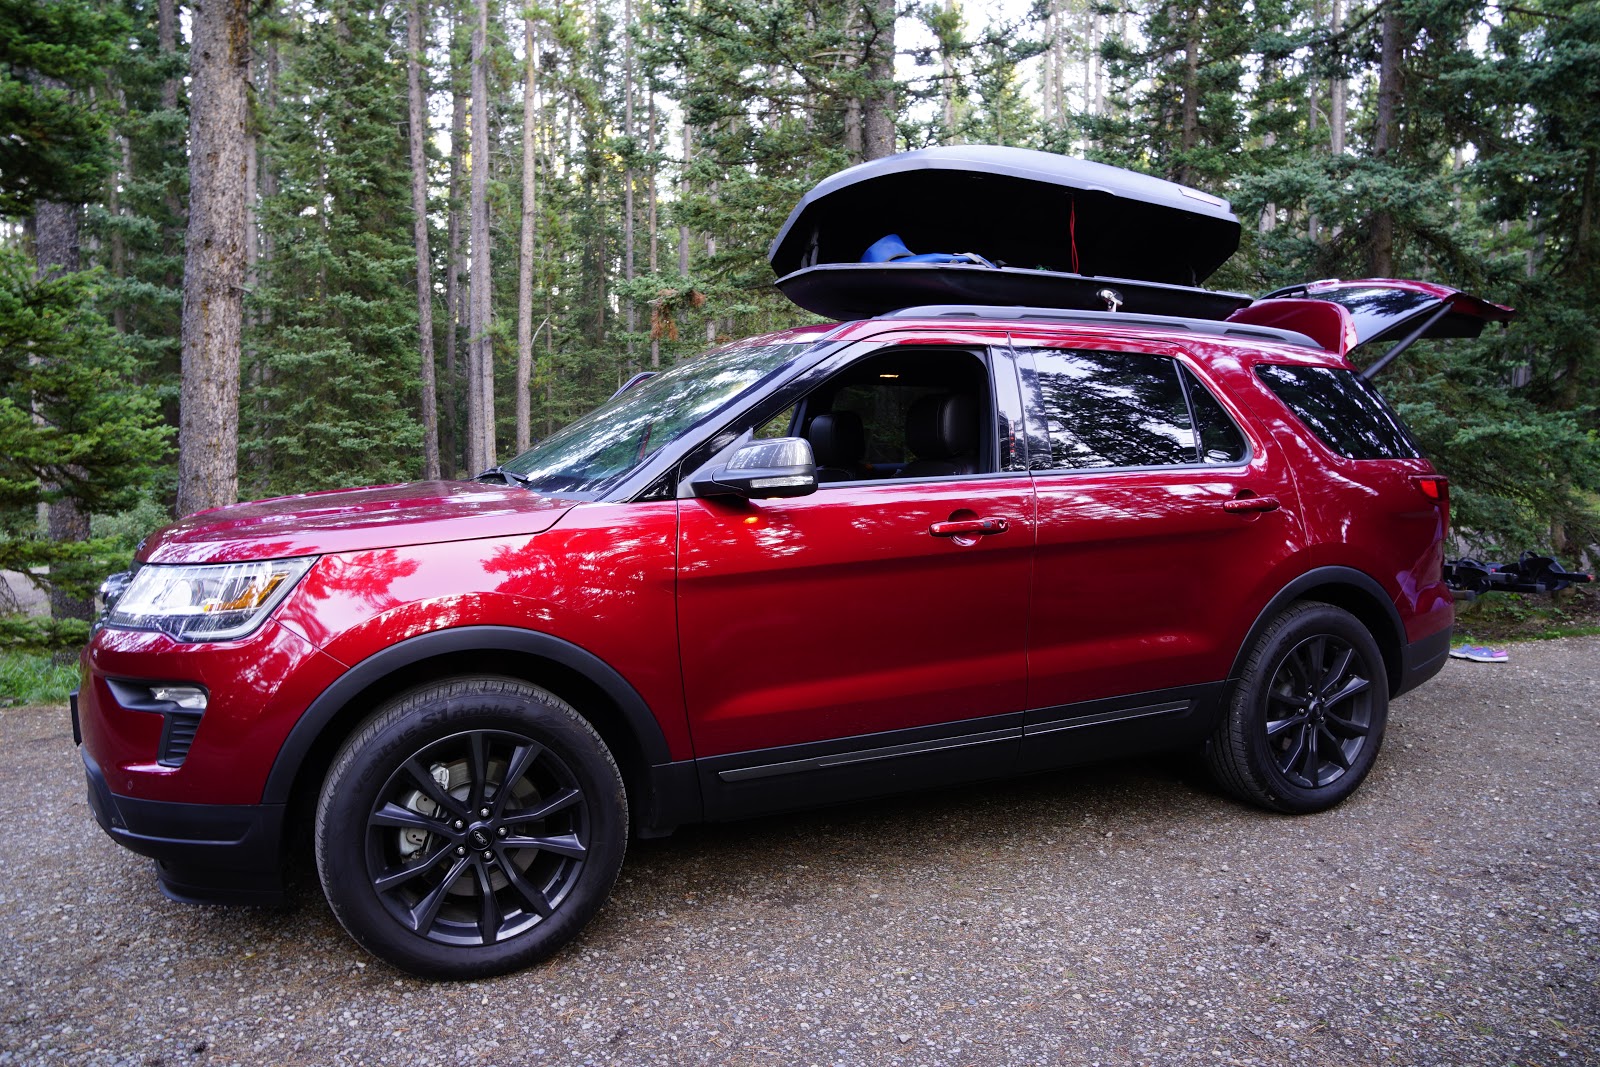 2018 Ford Explorer at Lake Louise Campground, Banff National Park